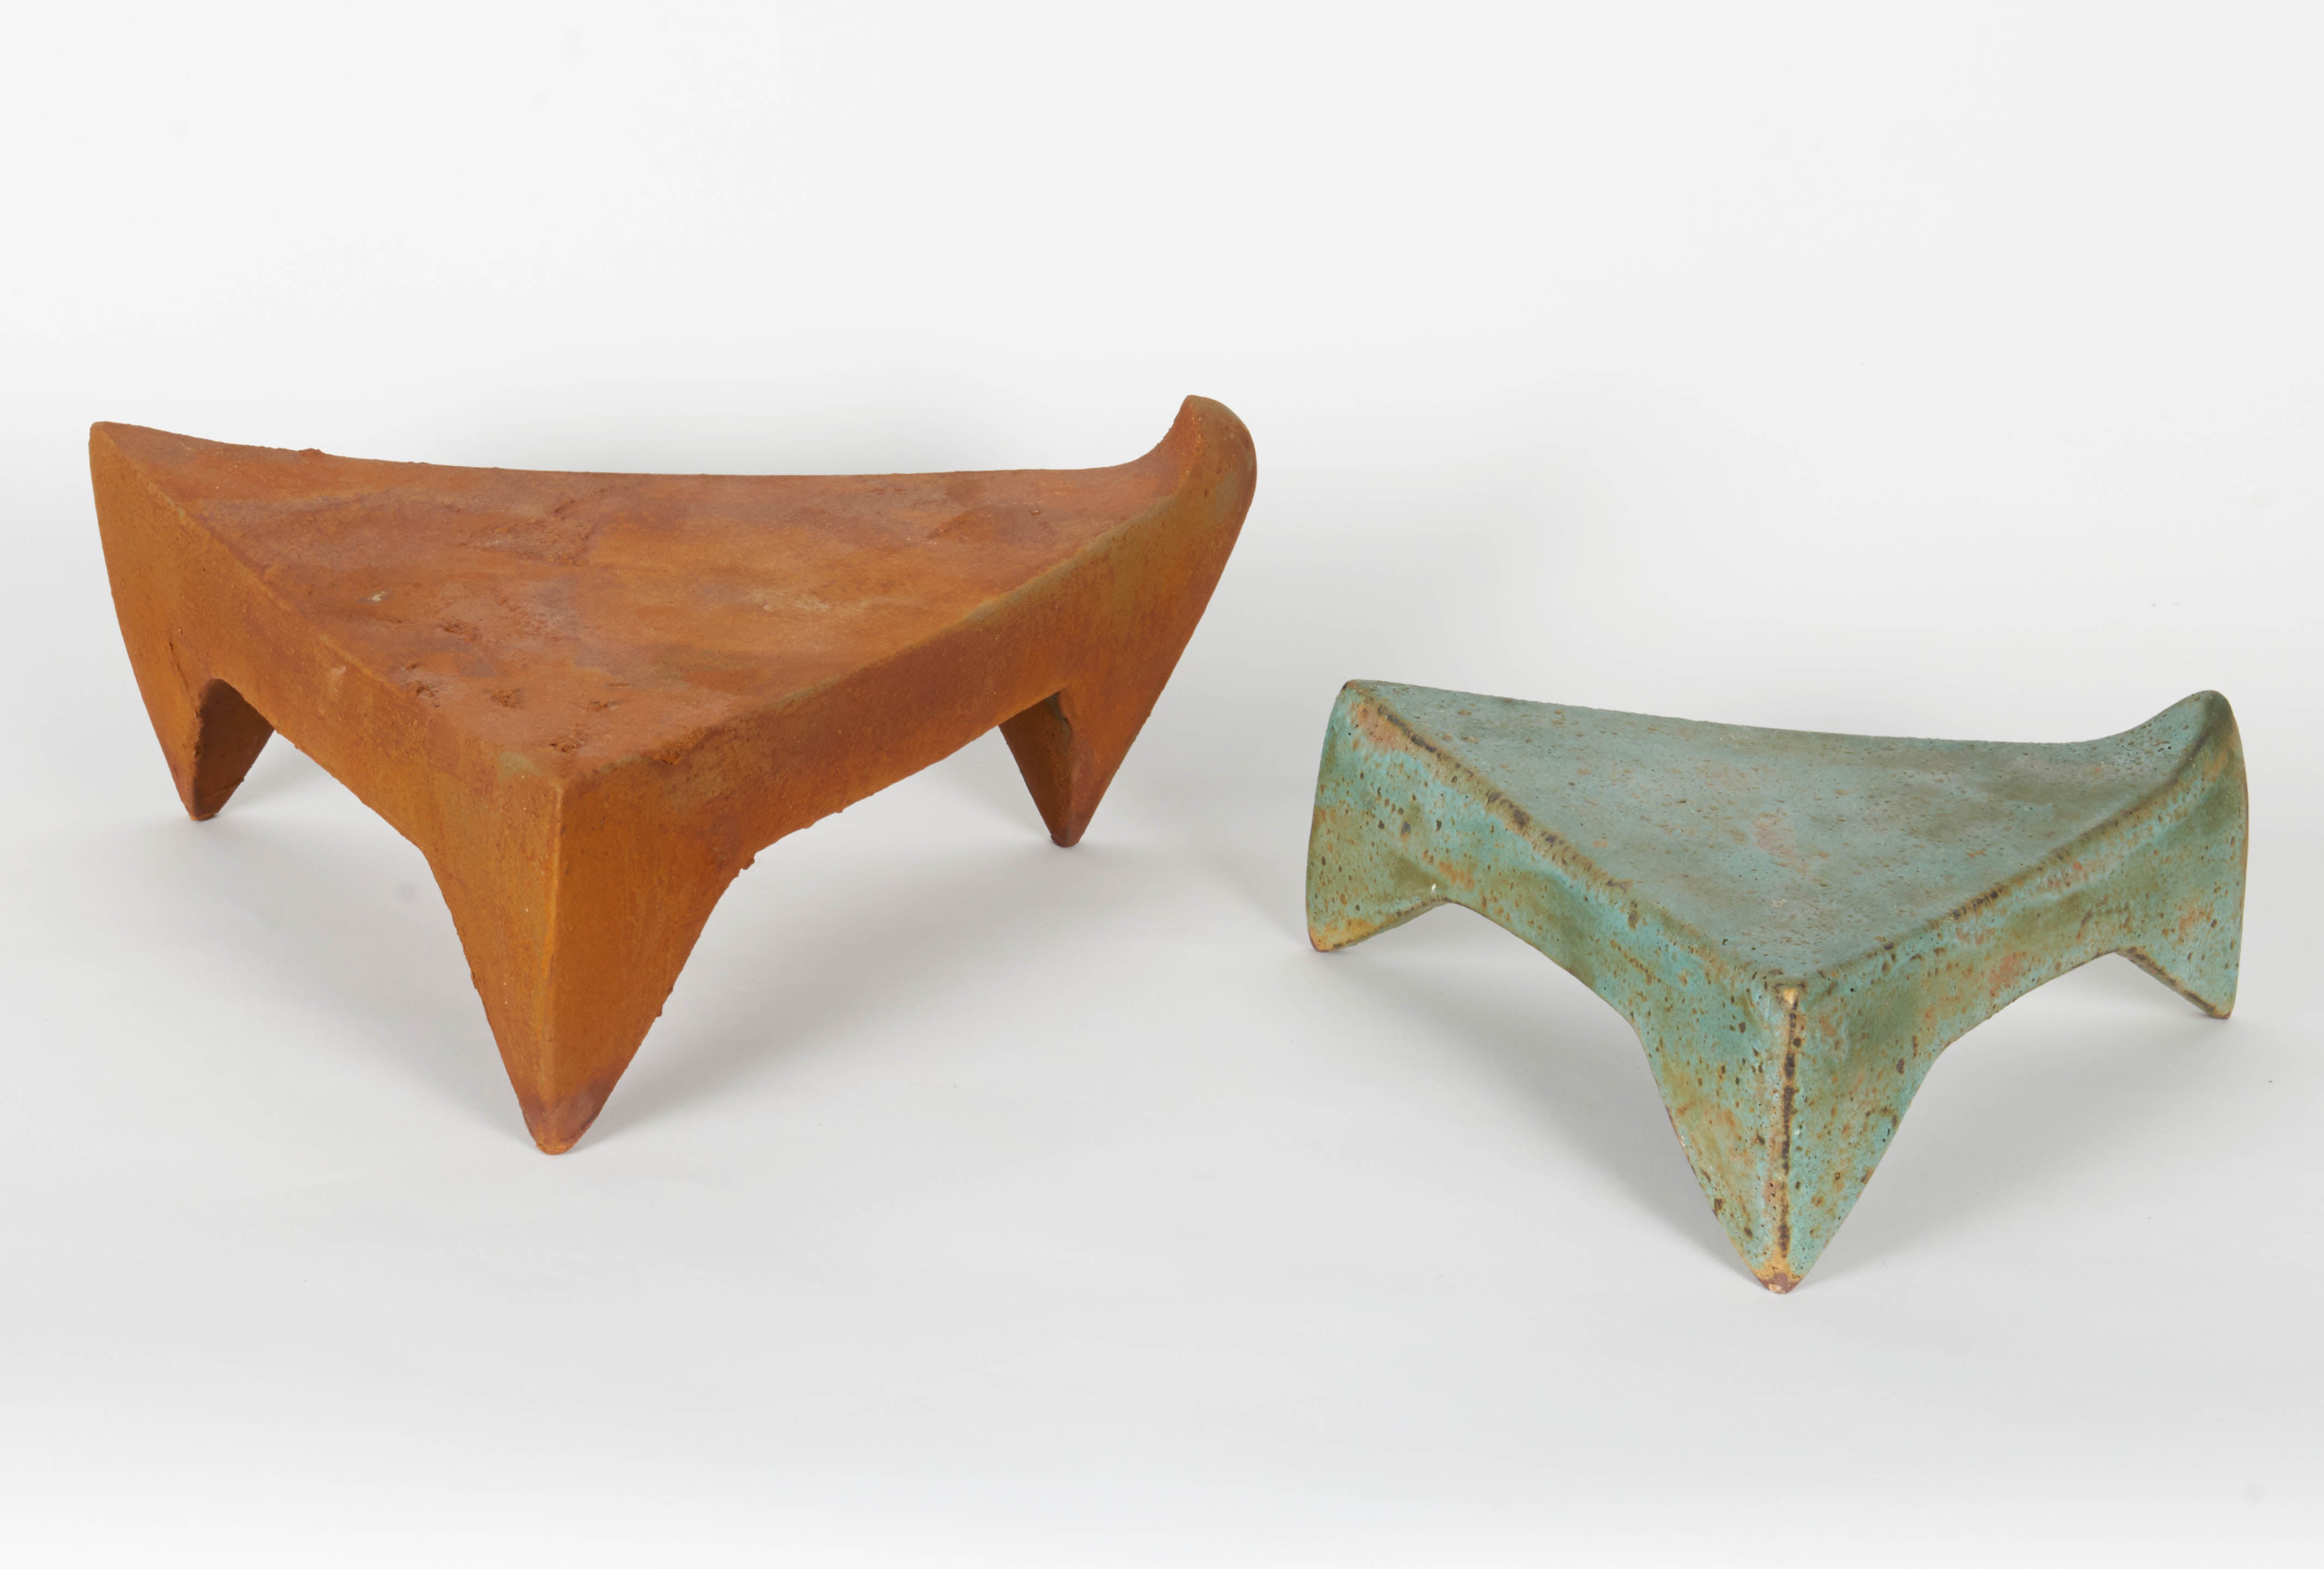 Richard Hirsch Ceramic Vessel and Stand, Tripod Vessels Collection, 1987 - 1994 For Sale 2